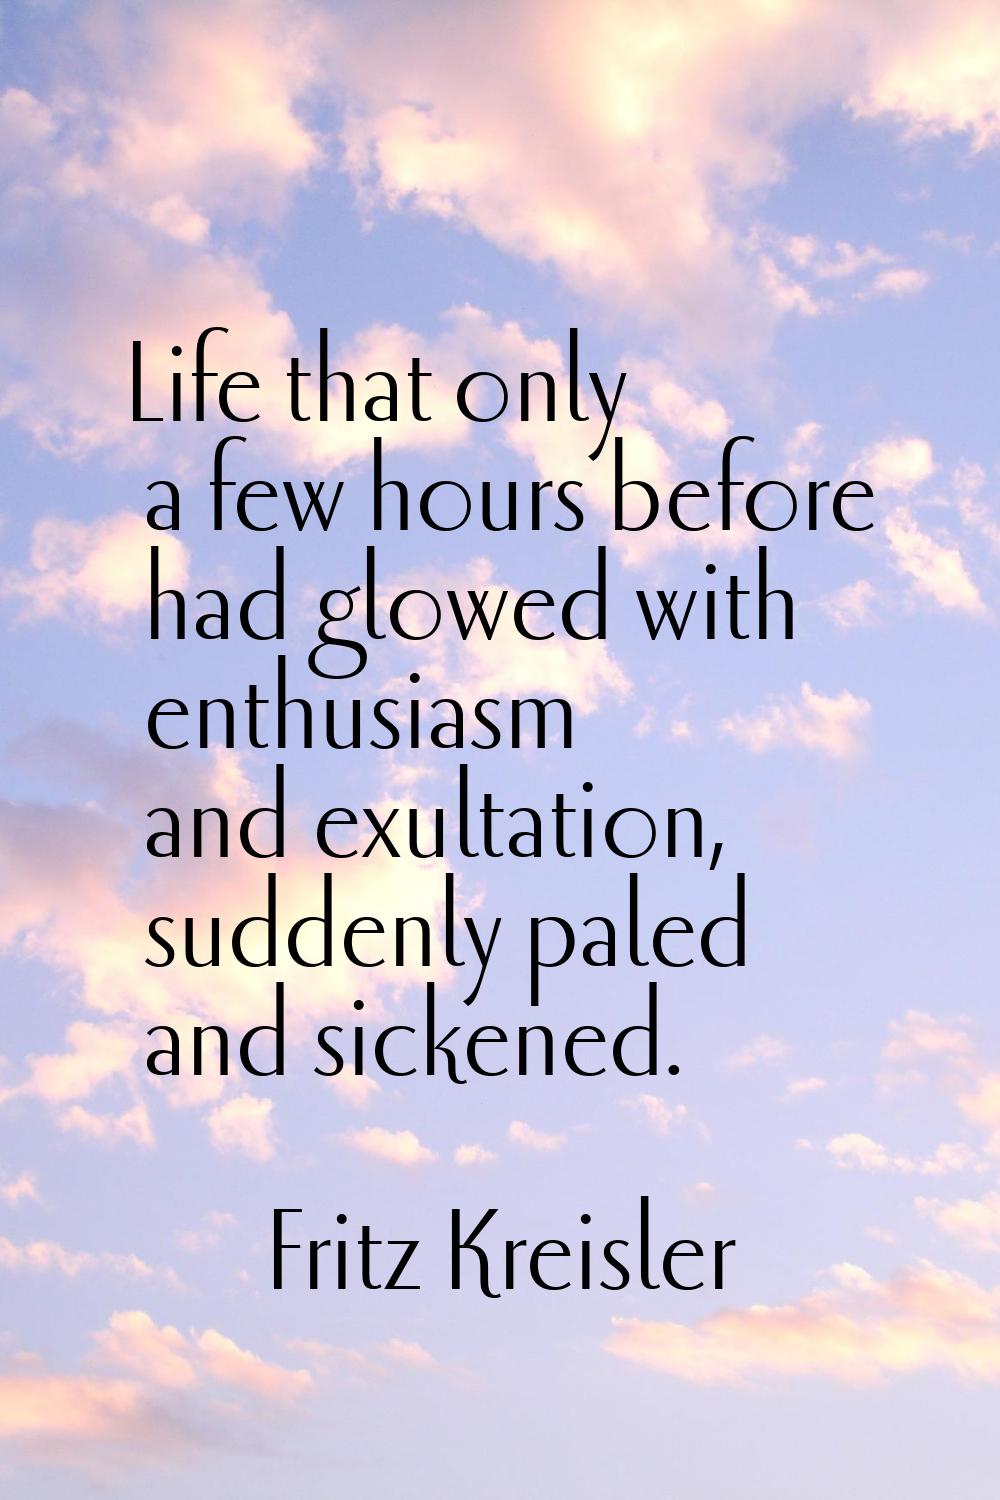 Life that only a few hours before had glowed with enthusiasm and exultation, suddenly paled and sic